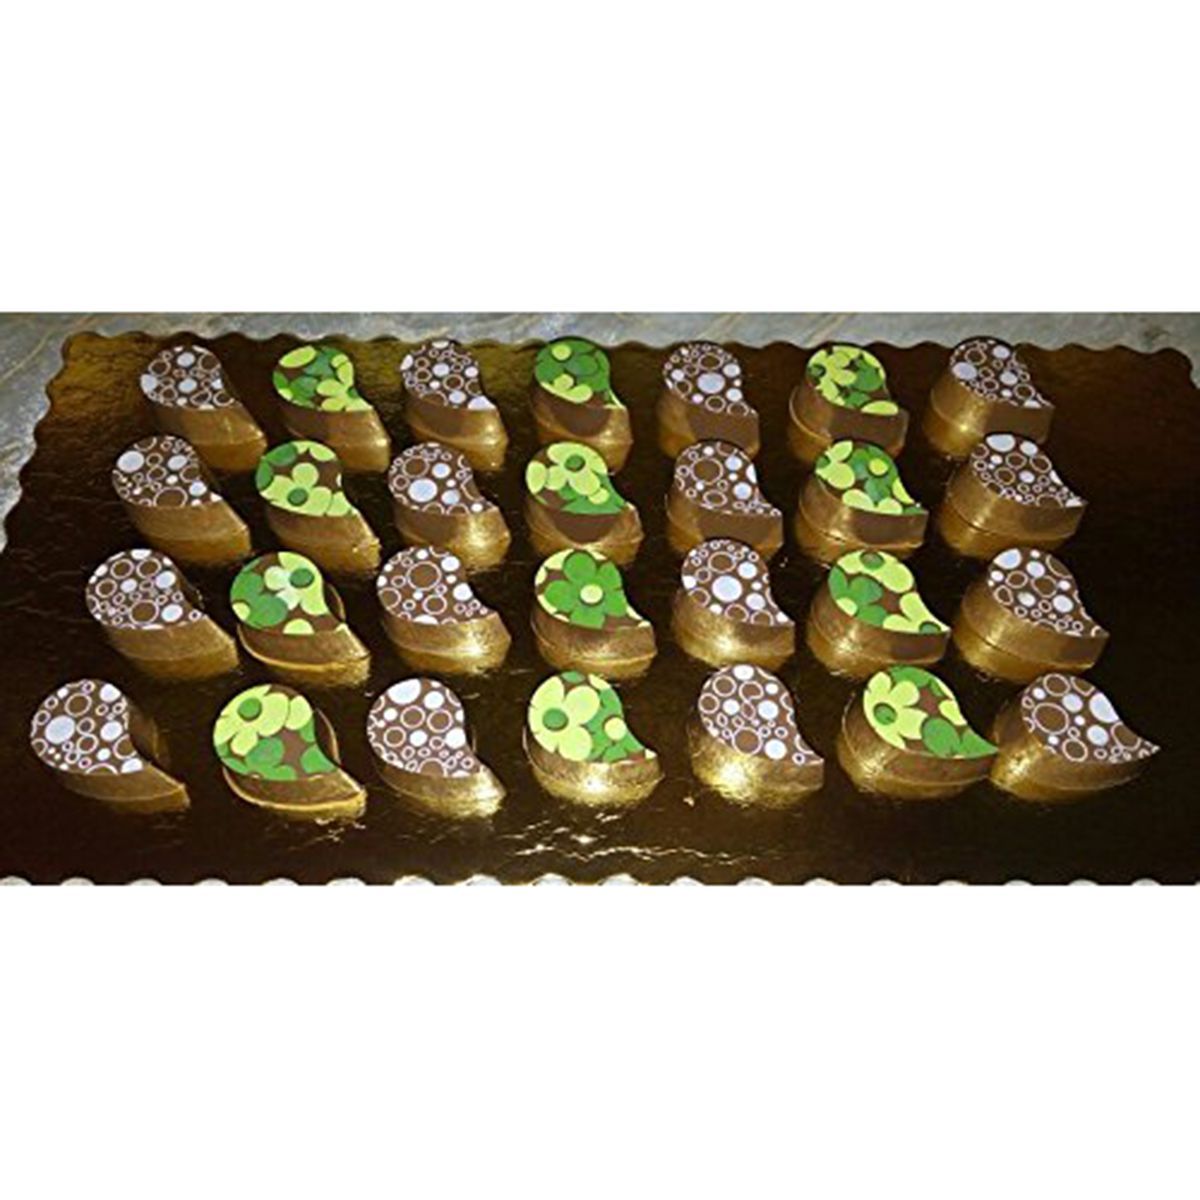 Polycarbonate-Crescent-Droplets-Comma-Chocolate-Mold-Shape-Candy-Cake-DIY-1684956